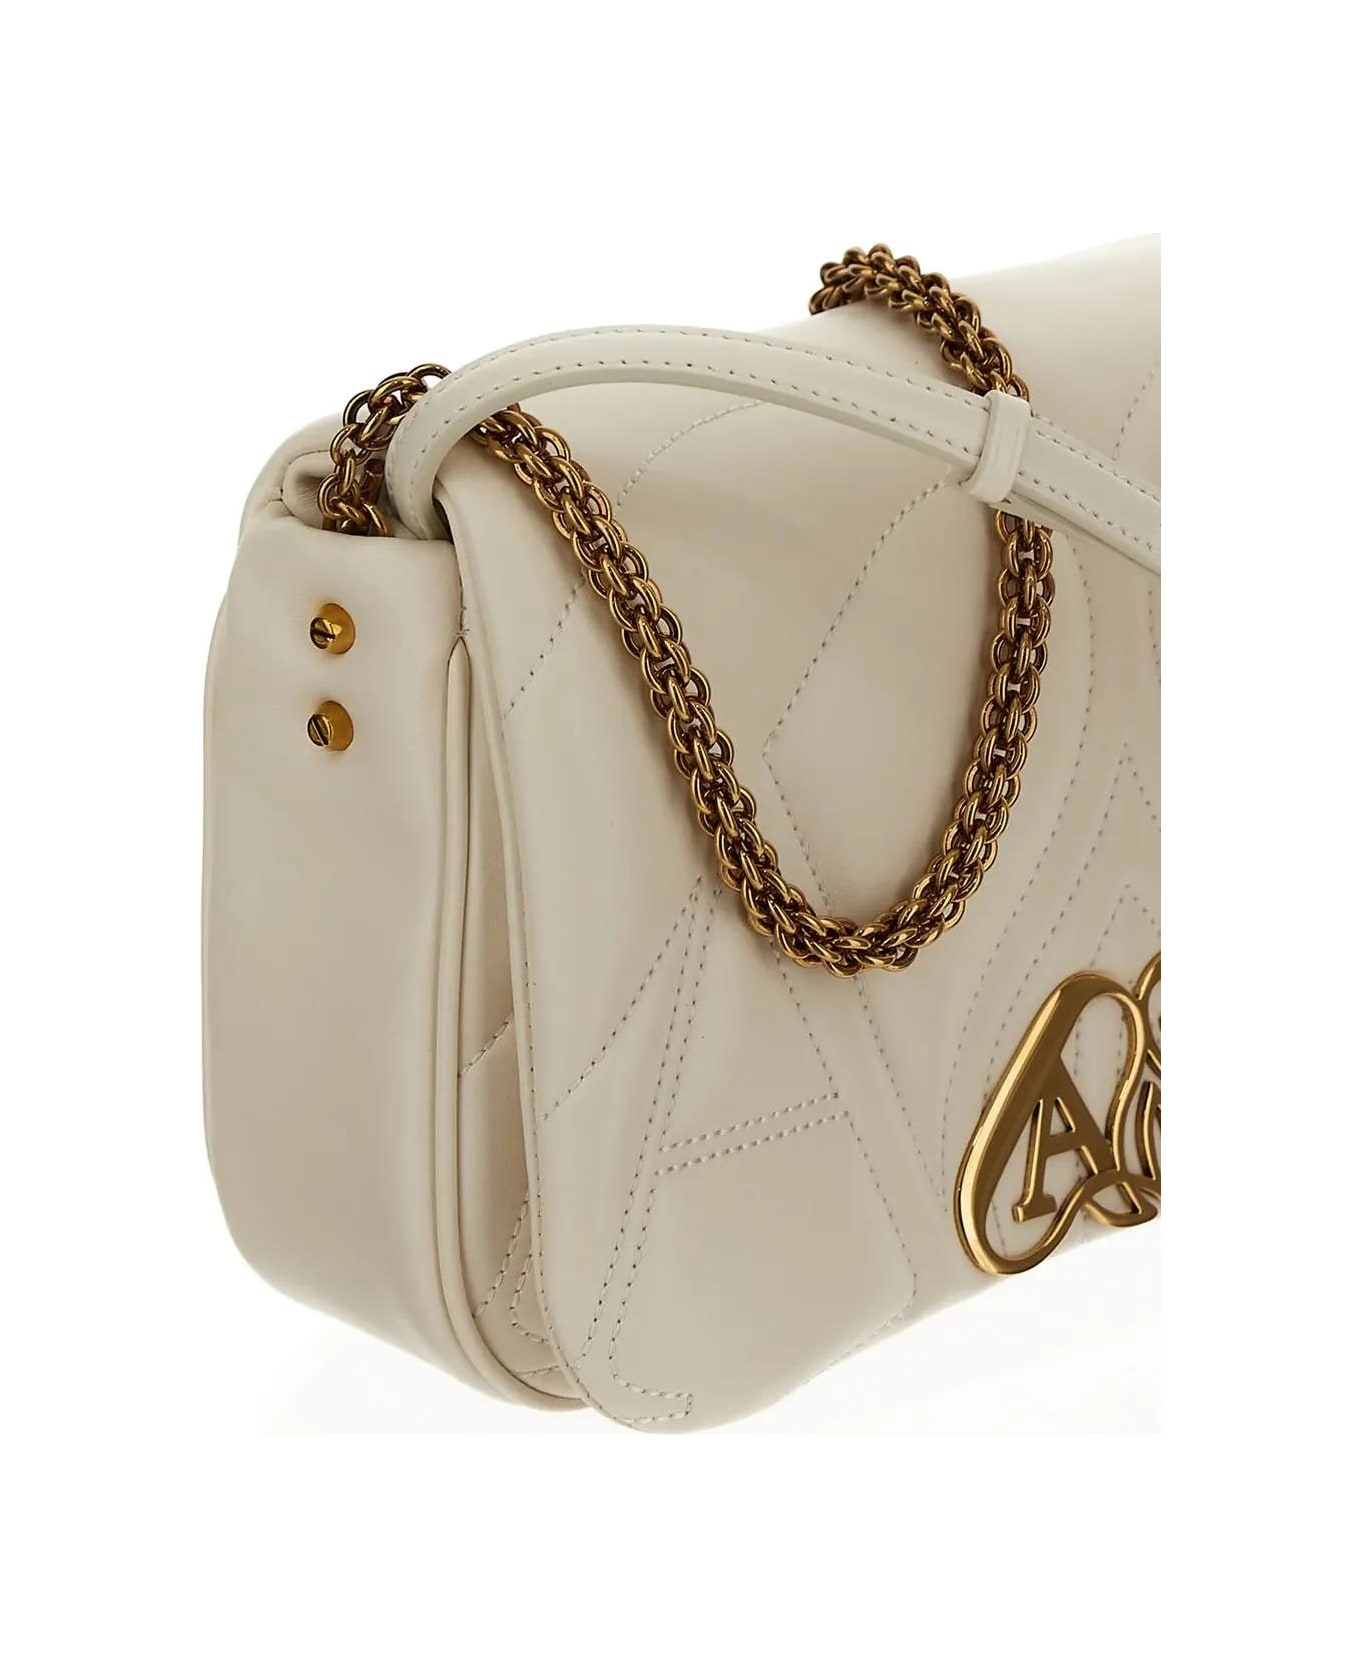 Alexander McQueen The Seal Bag - White ショルダーバッグ